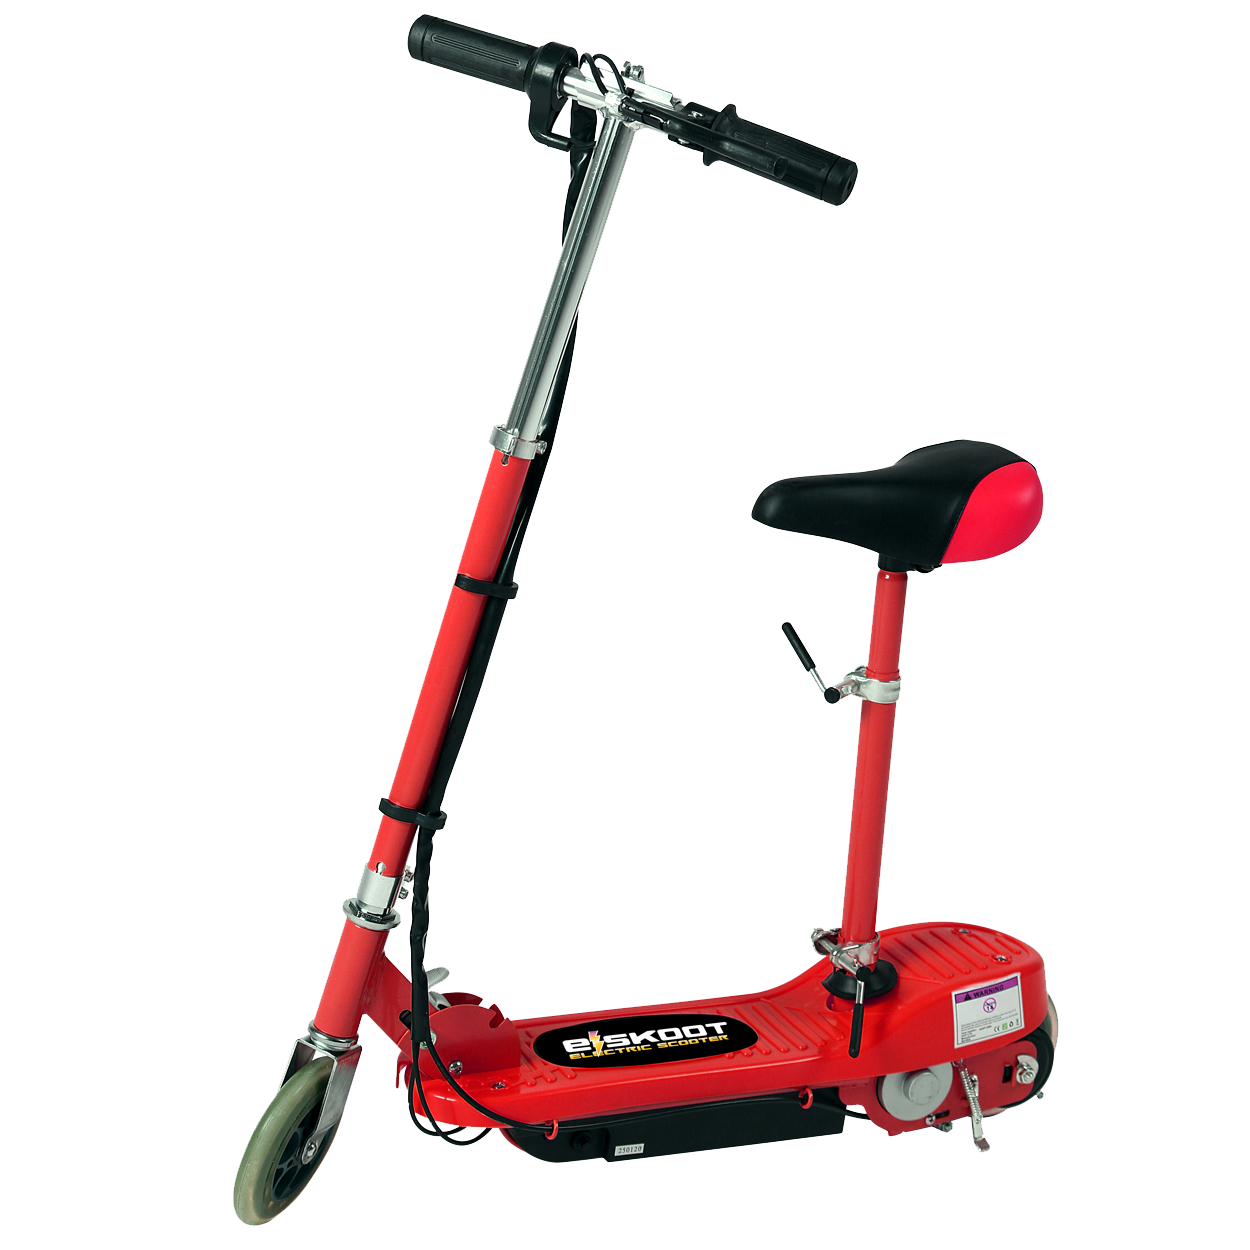 Red Electric Scooter